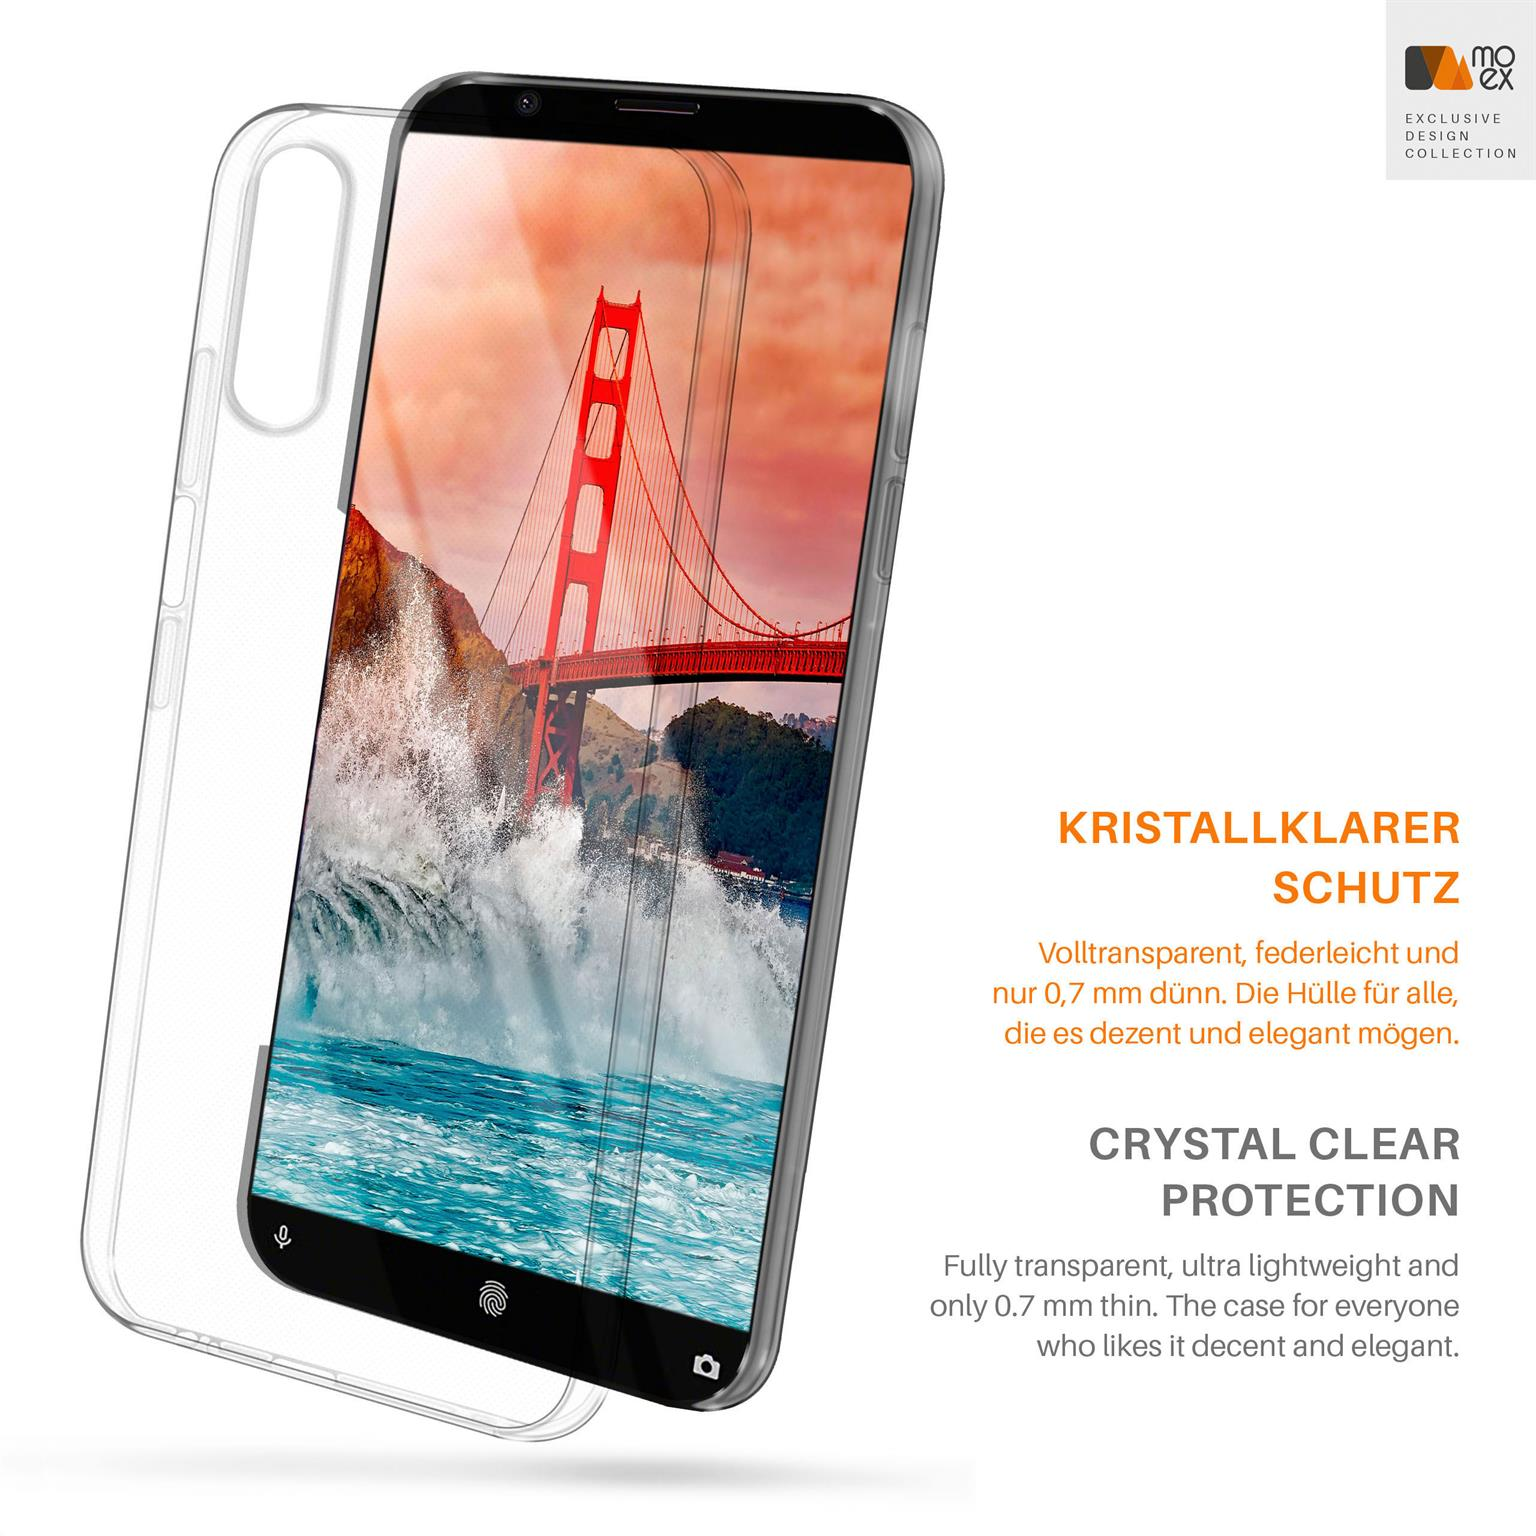 Backcover, Xperia Crystal-Clear 5, MOEX Sony, Aero Case,